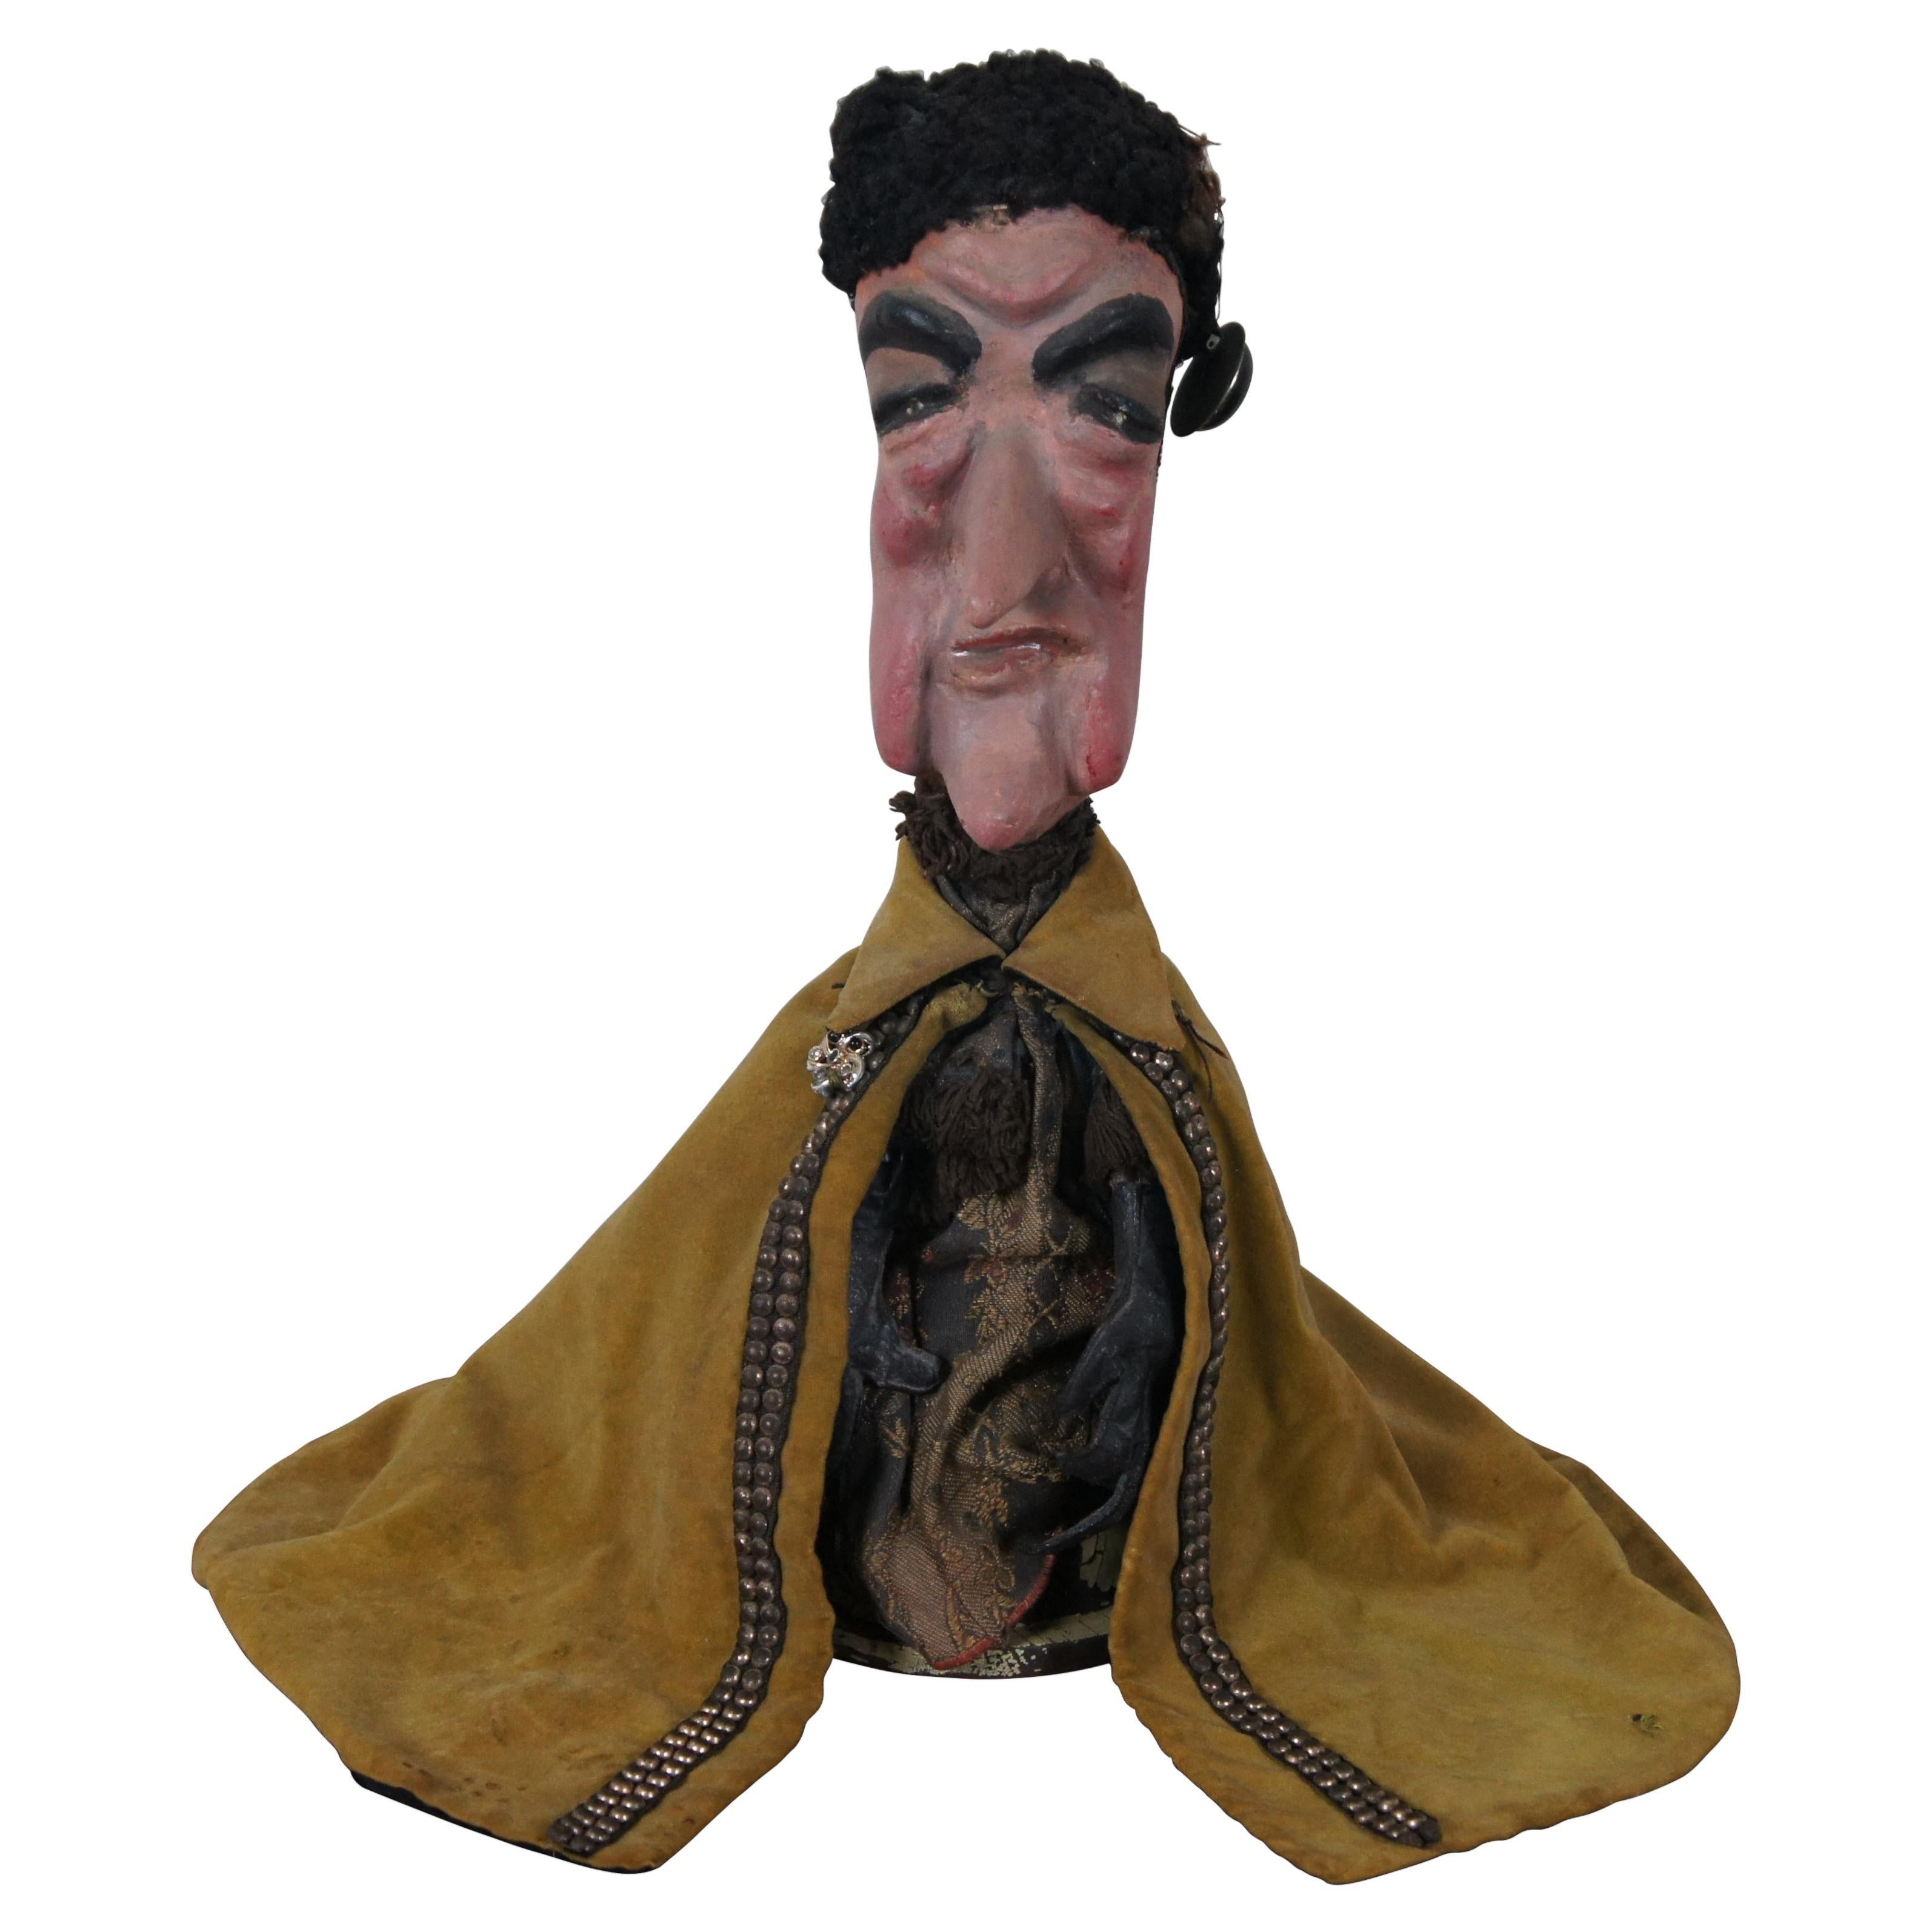 glove-puppet-stand - Picture to puppet